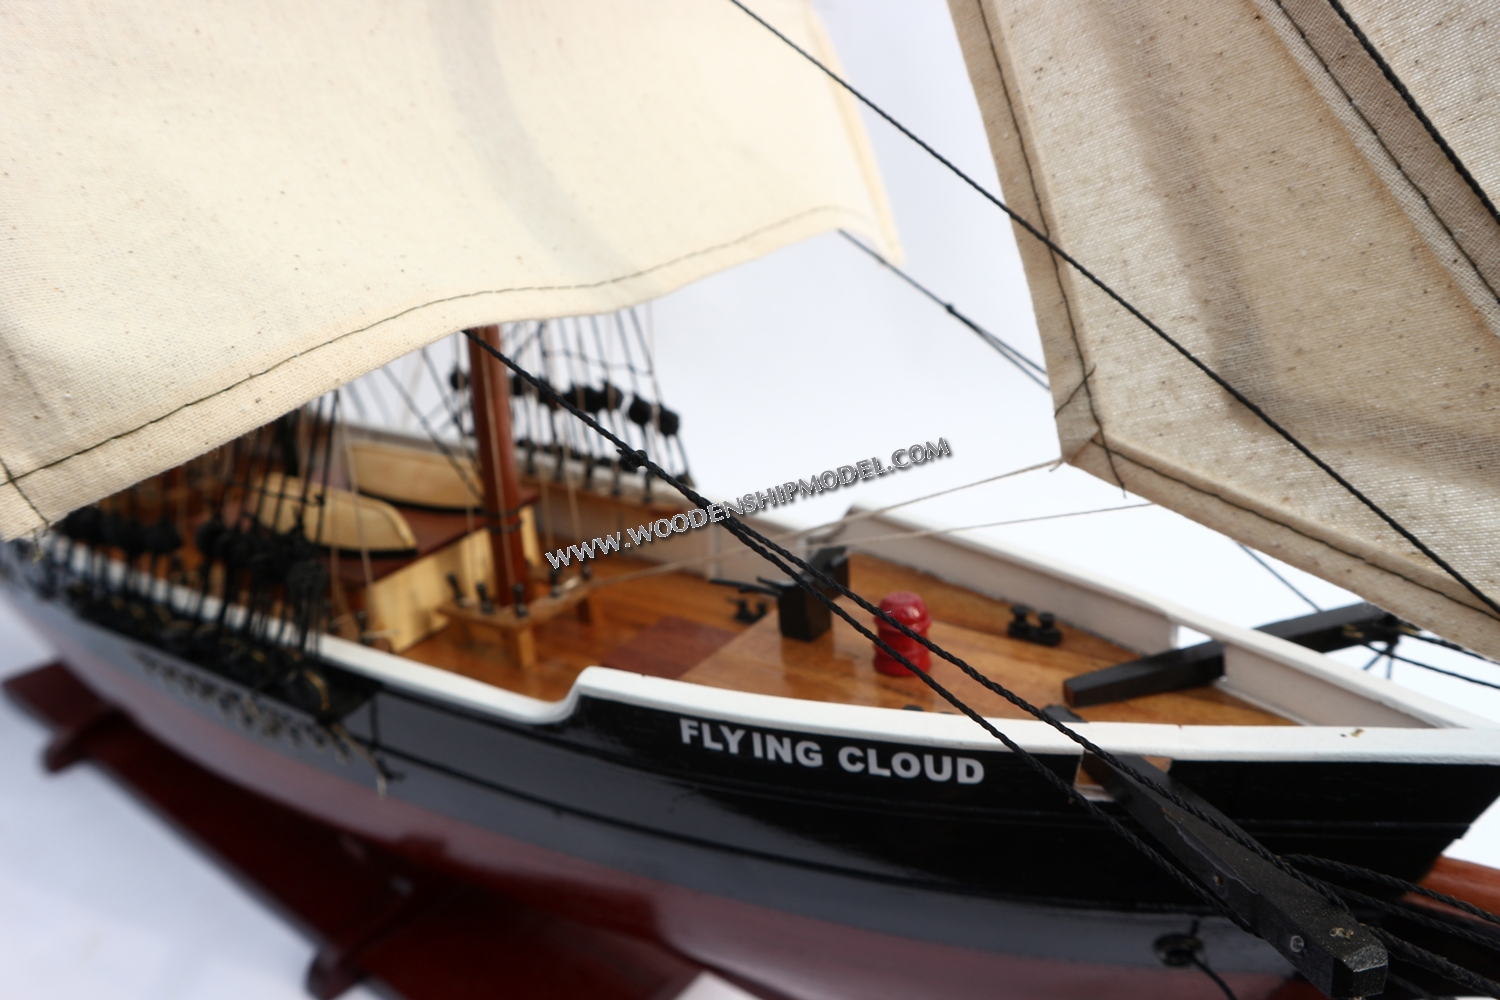 Flying Cloud was the most famous of the clippers built by Donald McKay. She was known for her extremely close race with the Hornet in 1853; for having a woman navigator, Eleanor Creesy, wife of Josiah Perkins Creesy who skippered the Flying Cloud on two record-setting voyages from New York to San Francisco; and for sailing in the Australia and timber trades.